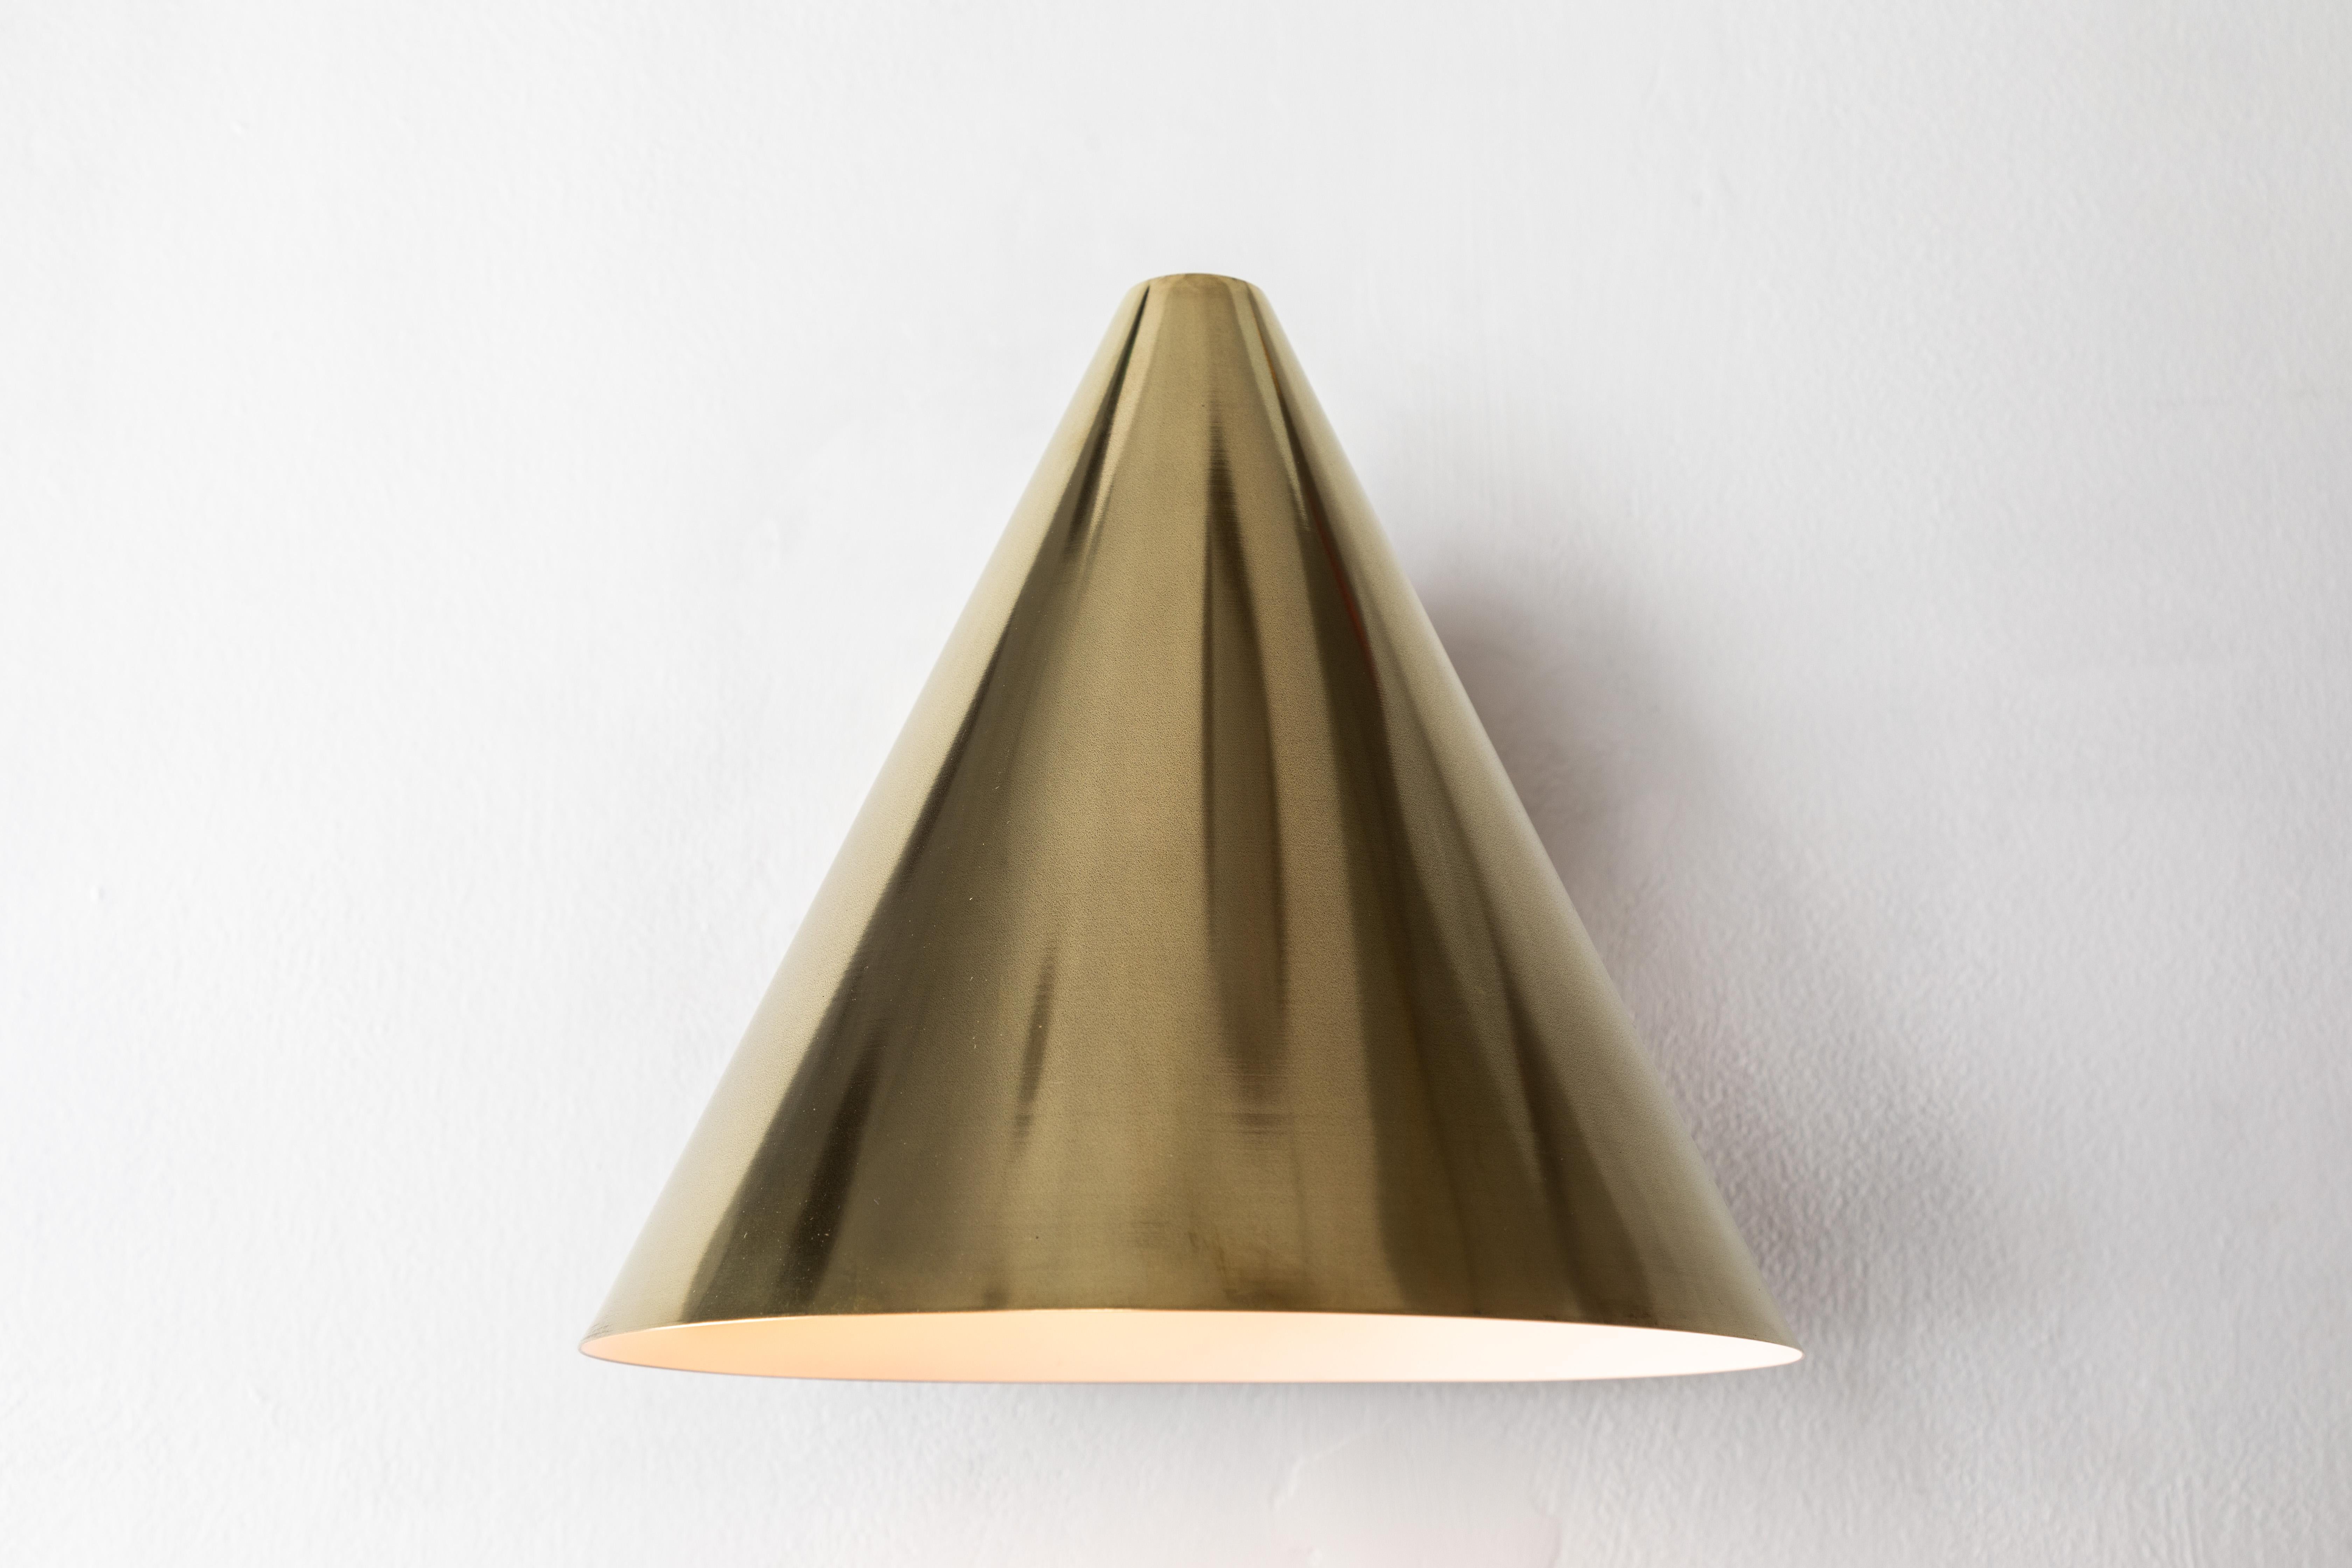 Polished Hans-Agne Jakobsson 'Tratten' Raw Brass Outdoor Sconce For Sale